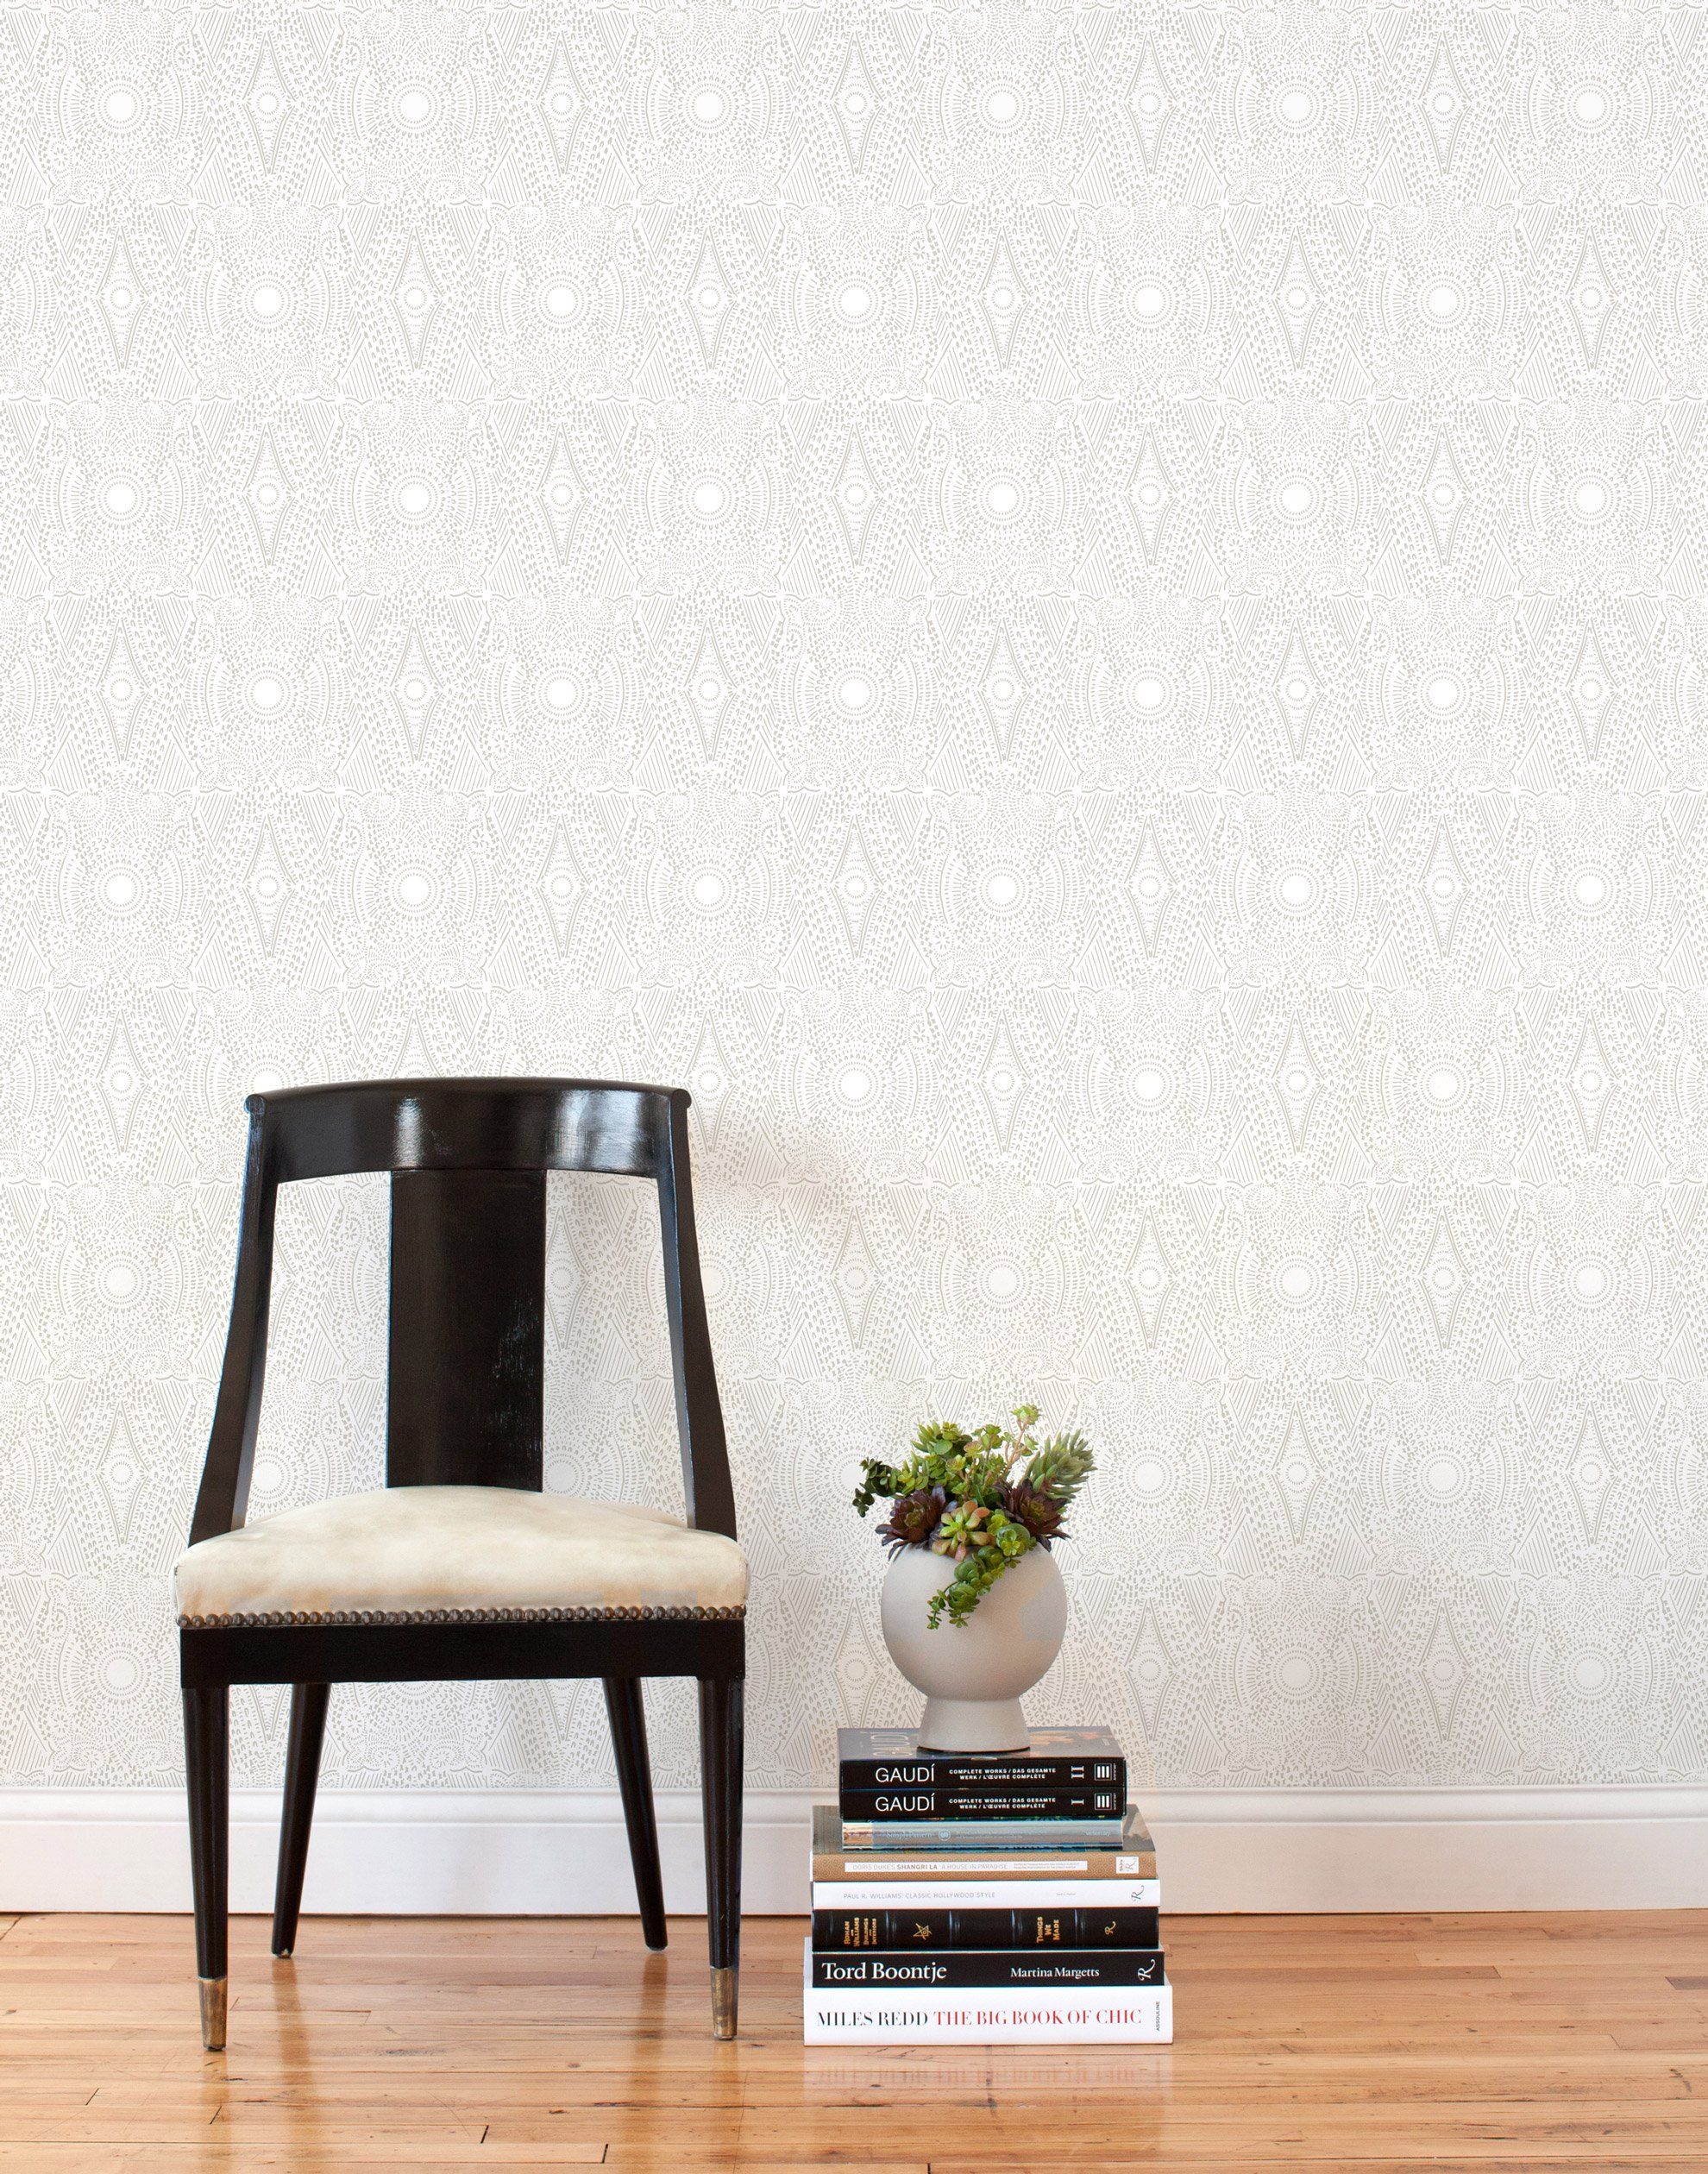 FEELPZONE Matte White Wallpaper White Contact Paper White Peel and Stick  Wallpaper SelfAdhesive Removable